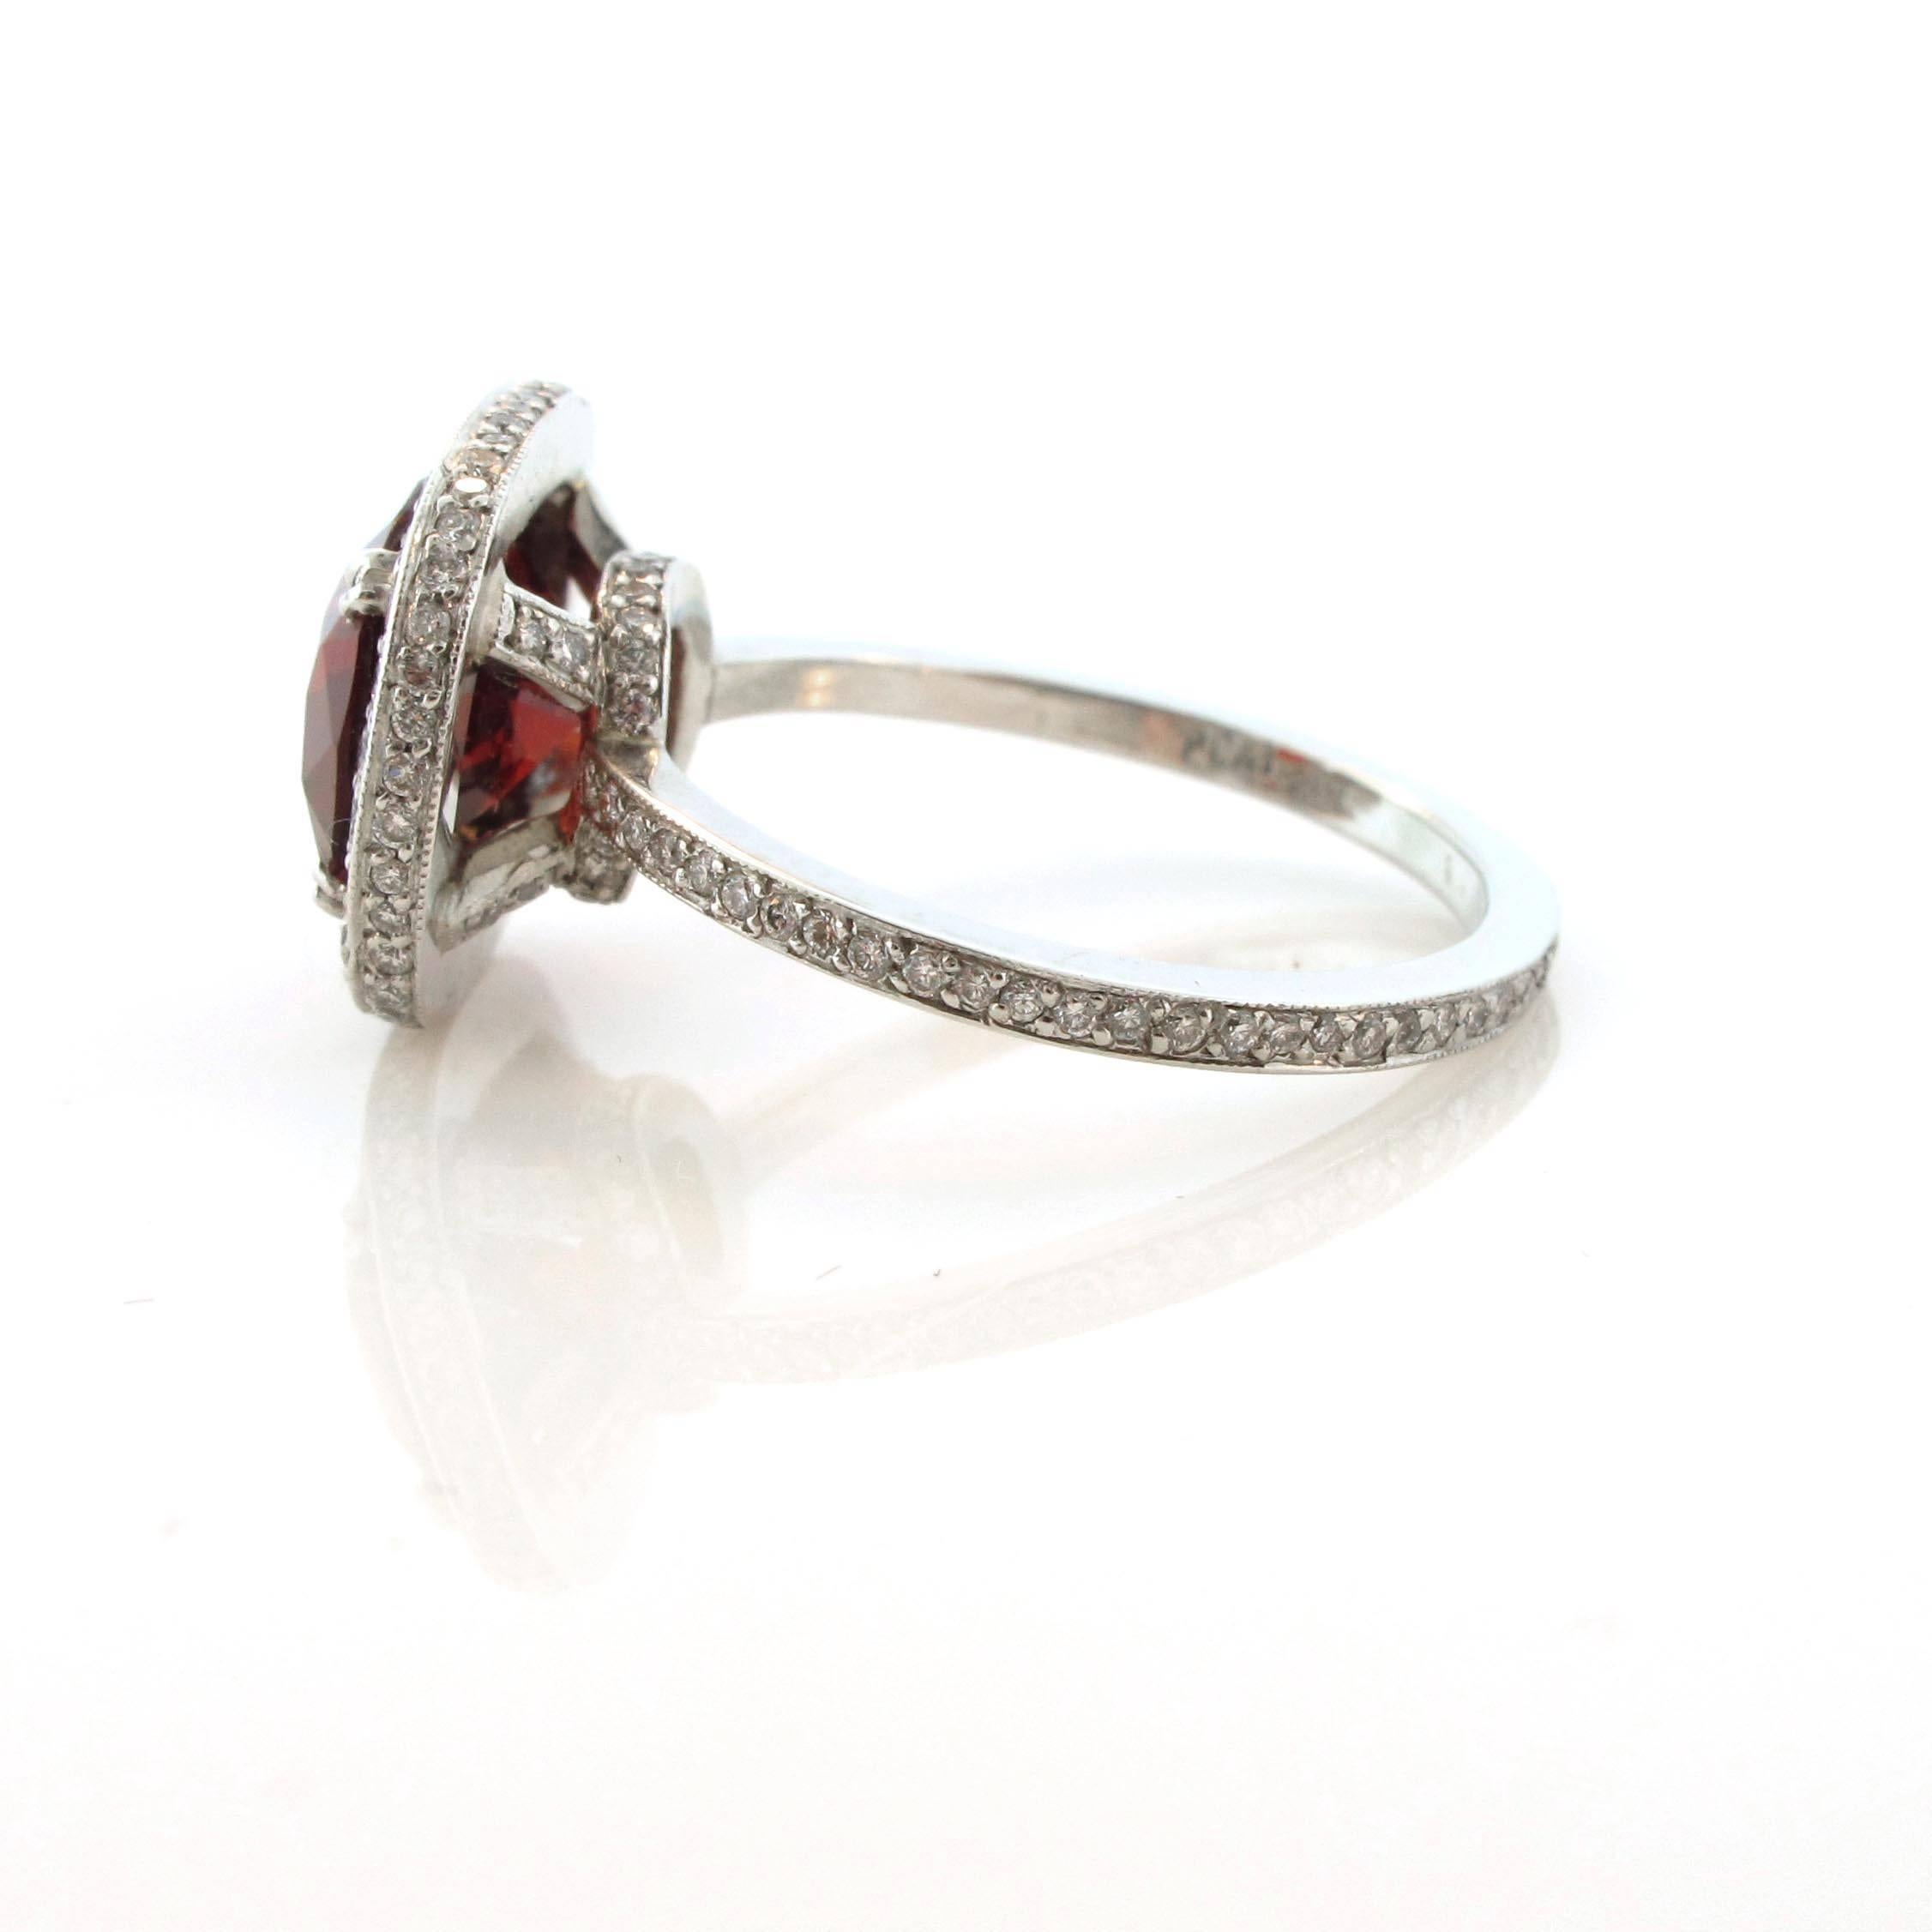 Women's or Men's 3.40 Carat, Platinum Spinel and Diamond Cocktail Ring